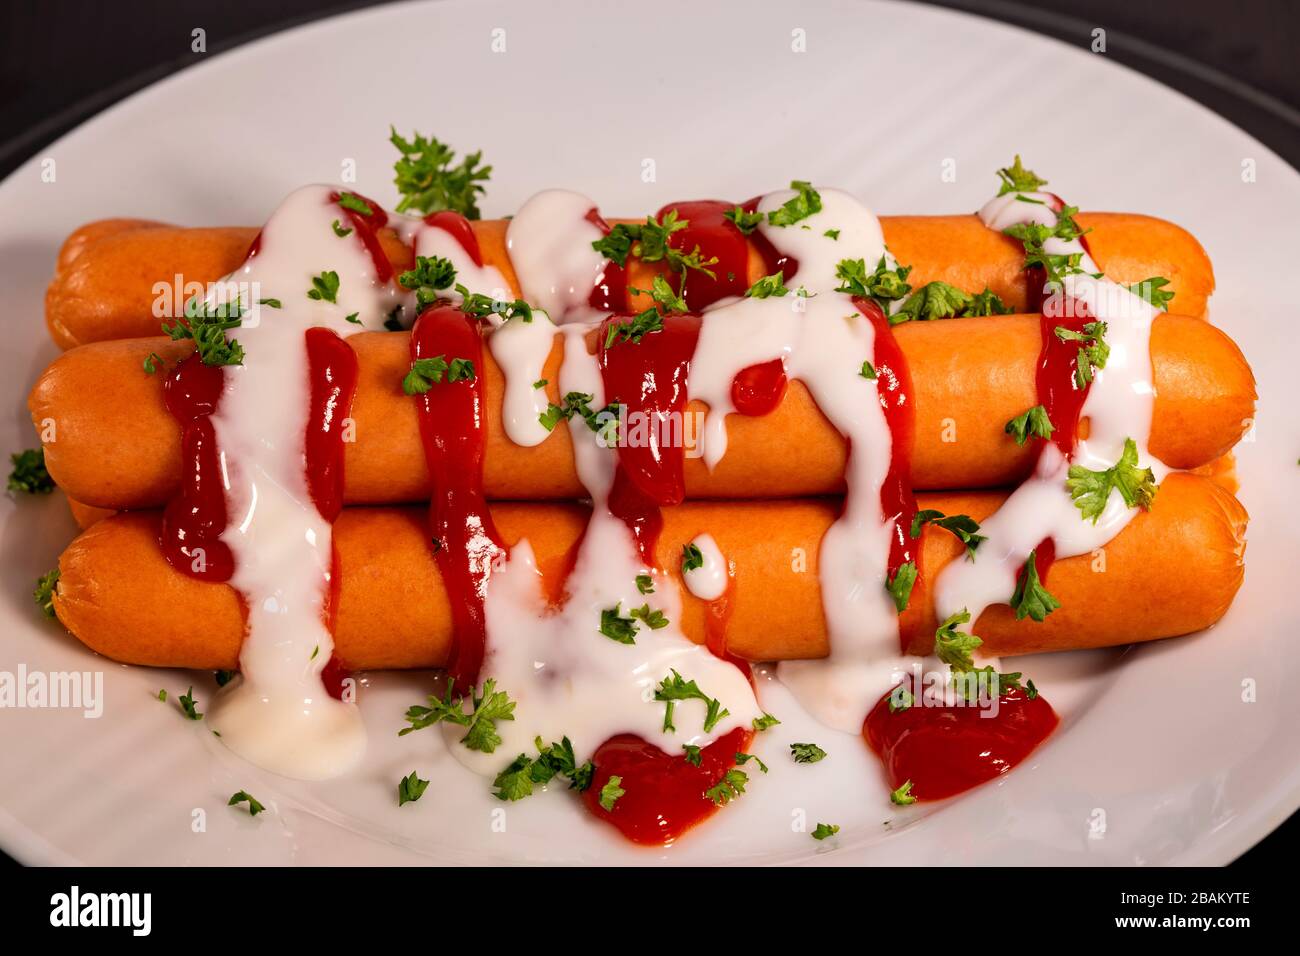 Boiled sausages with ketchup, mayonnaise and herbs on the plate Stock Photo